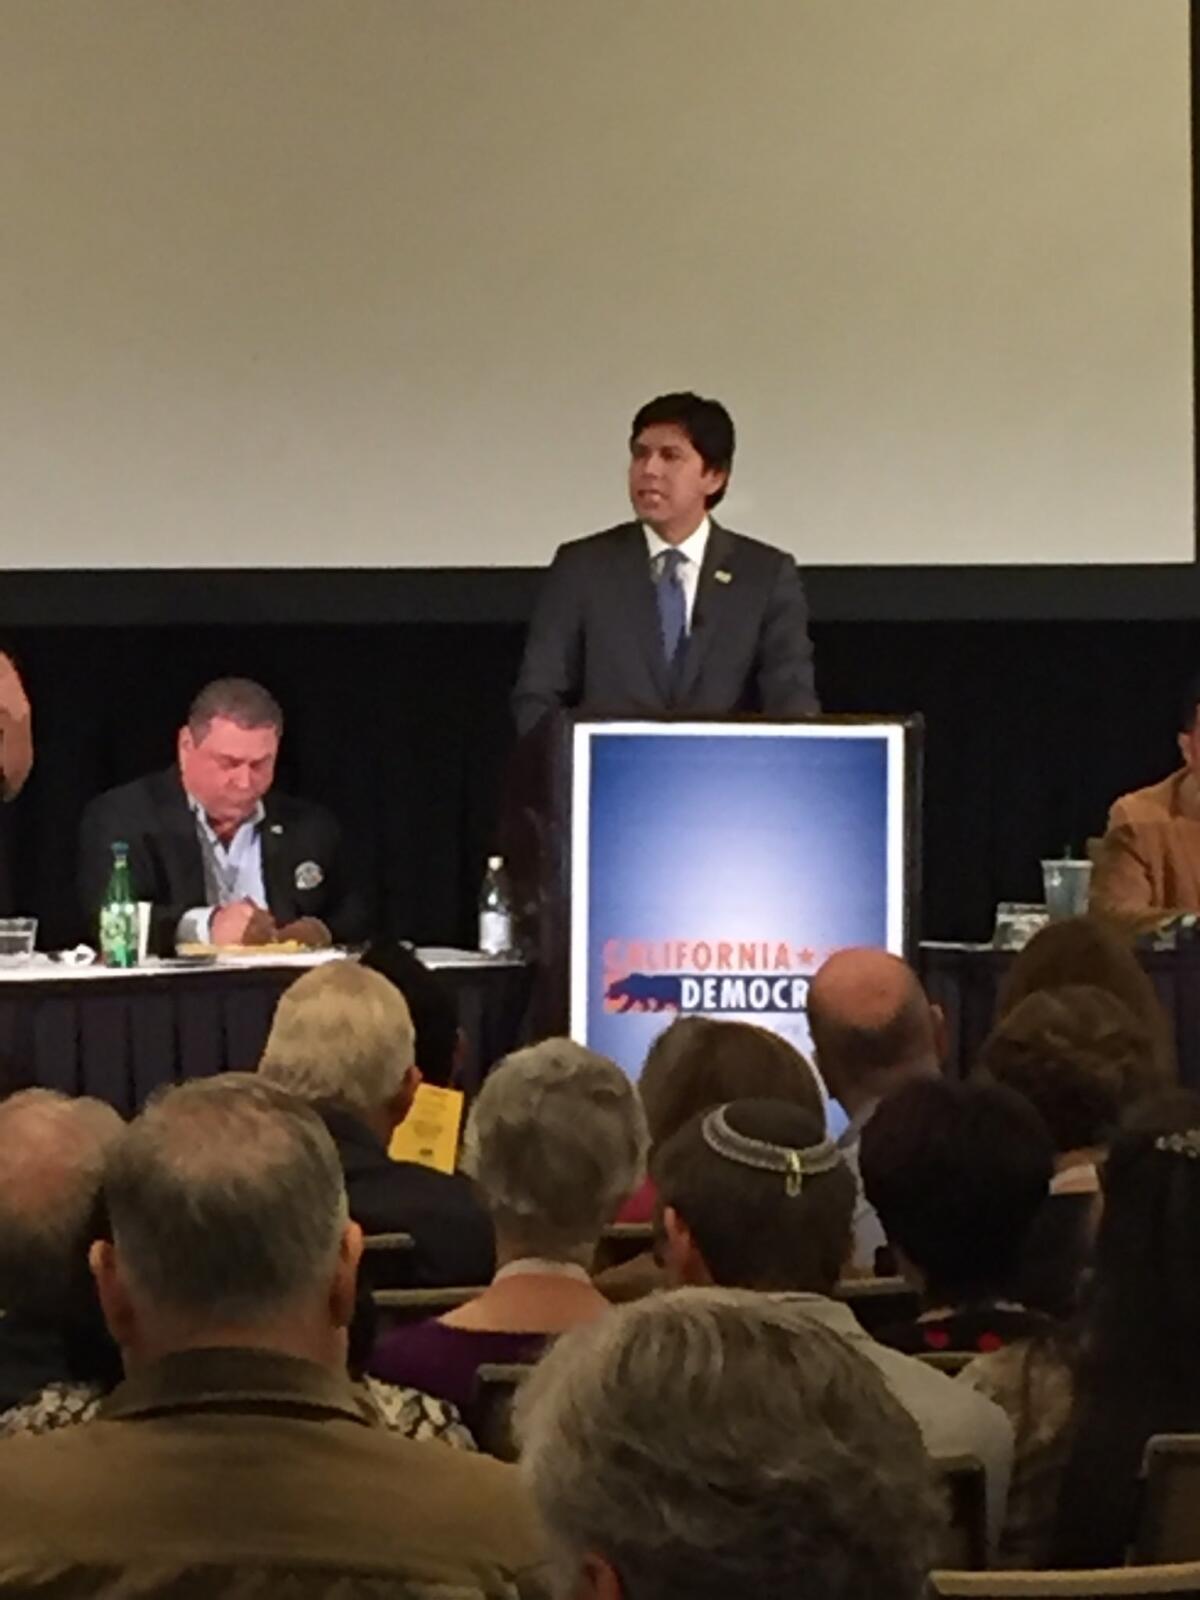 Senate President Pro Tem Kevin de León (D-Los Angeles) speaks Saturday at the state Democratic Party’s Executive Board meeting.